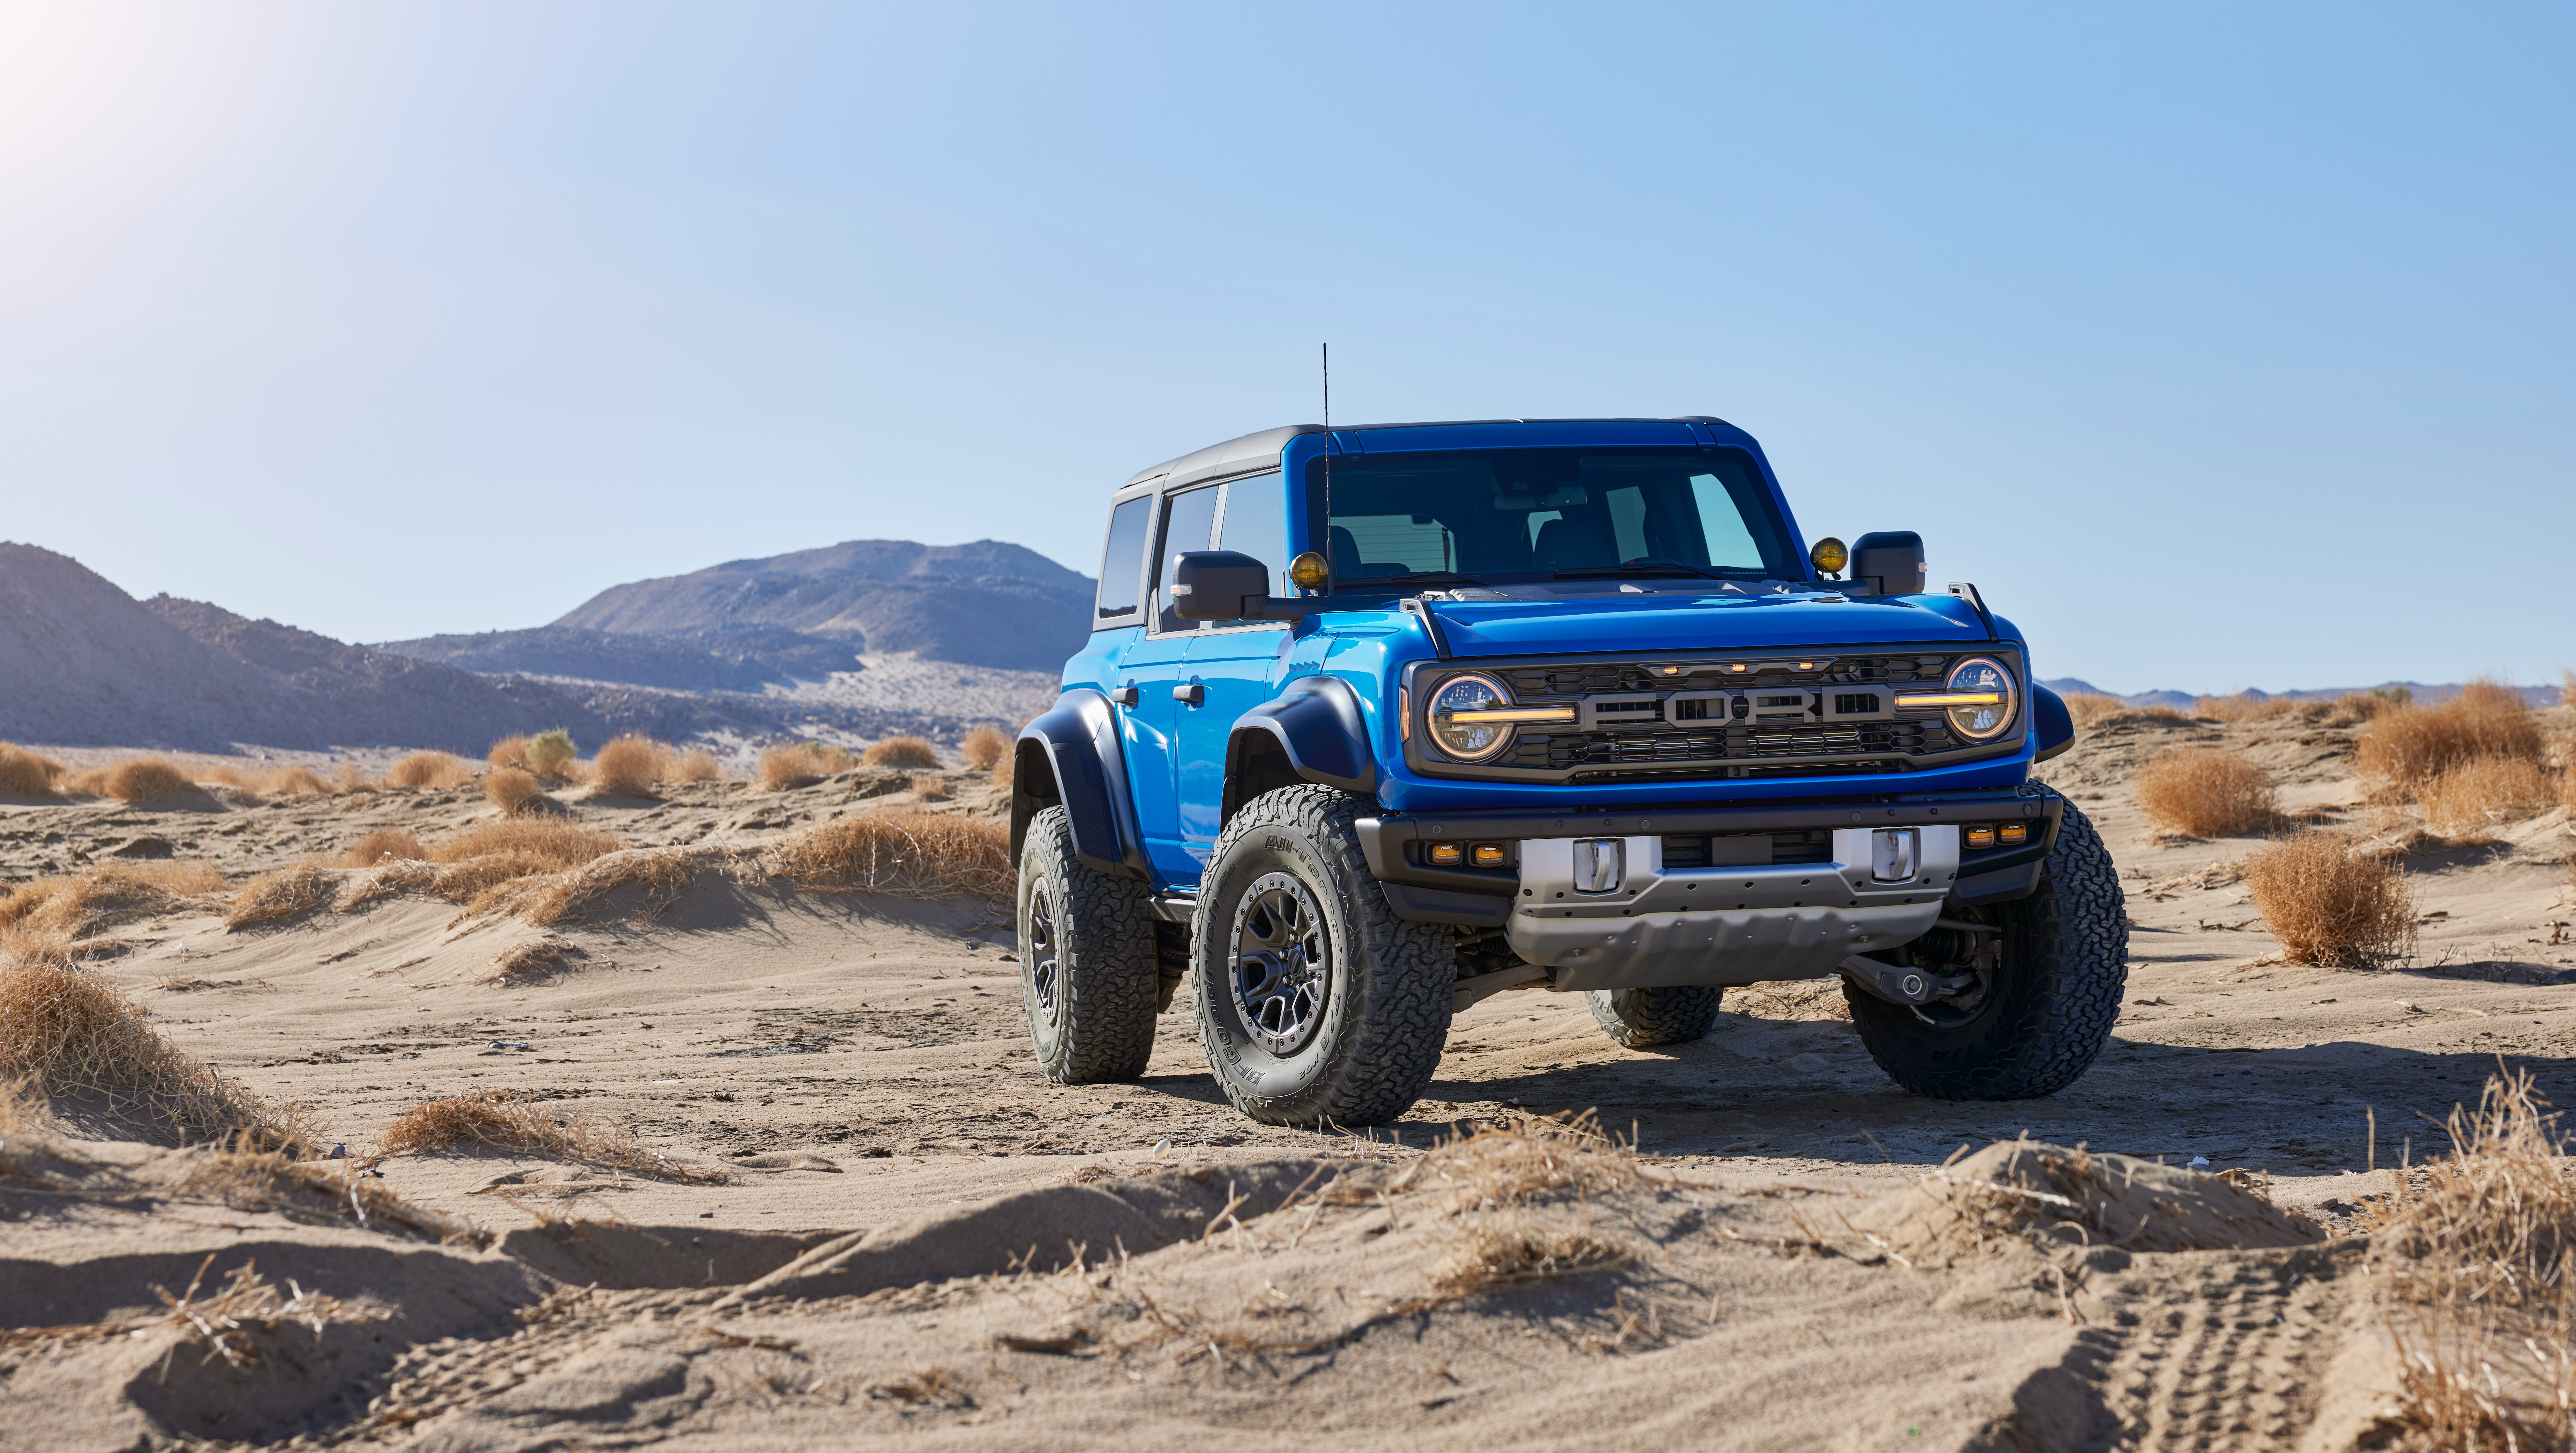 Is the Ford Bronco coming to the UK?